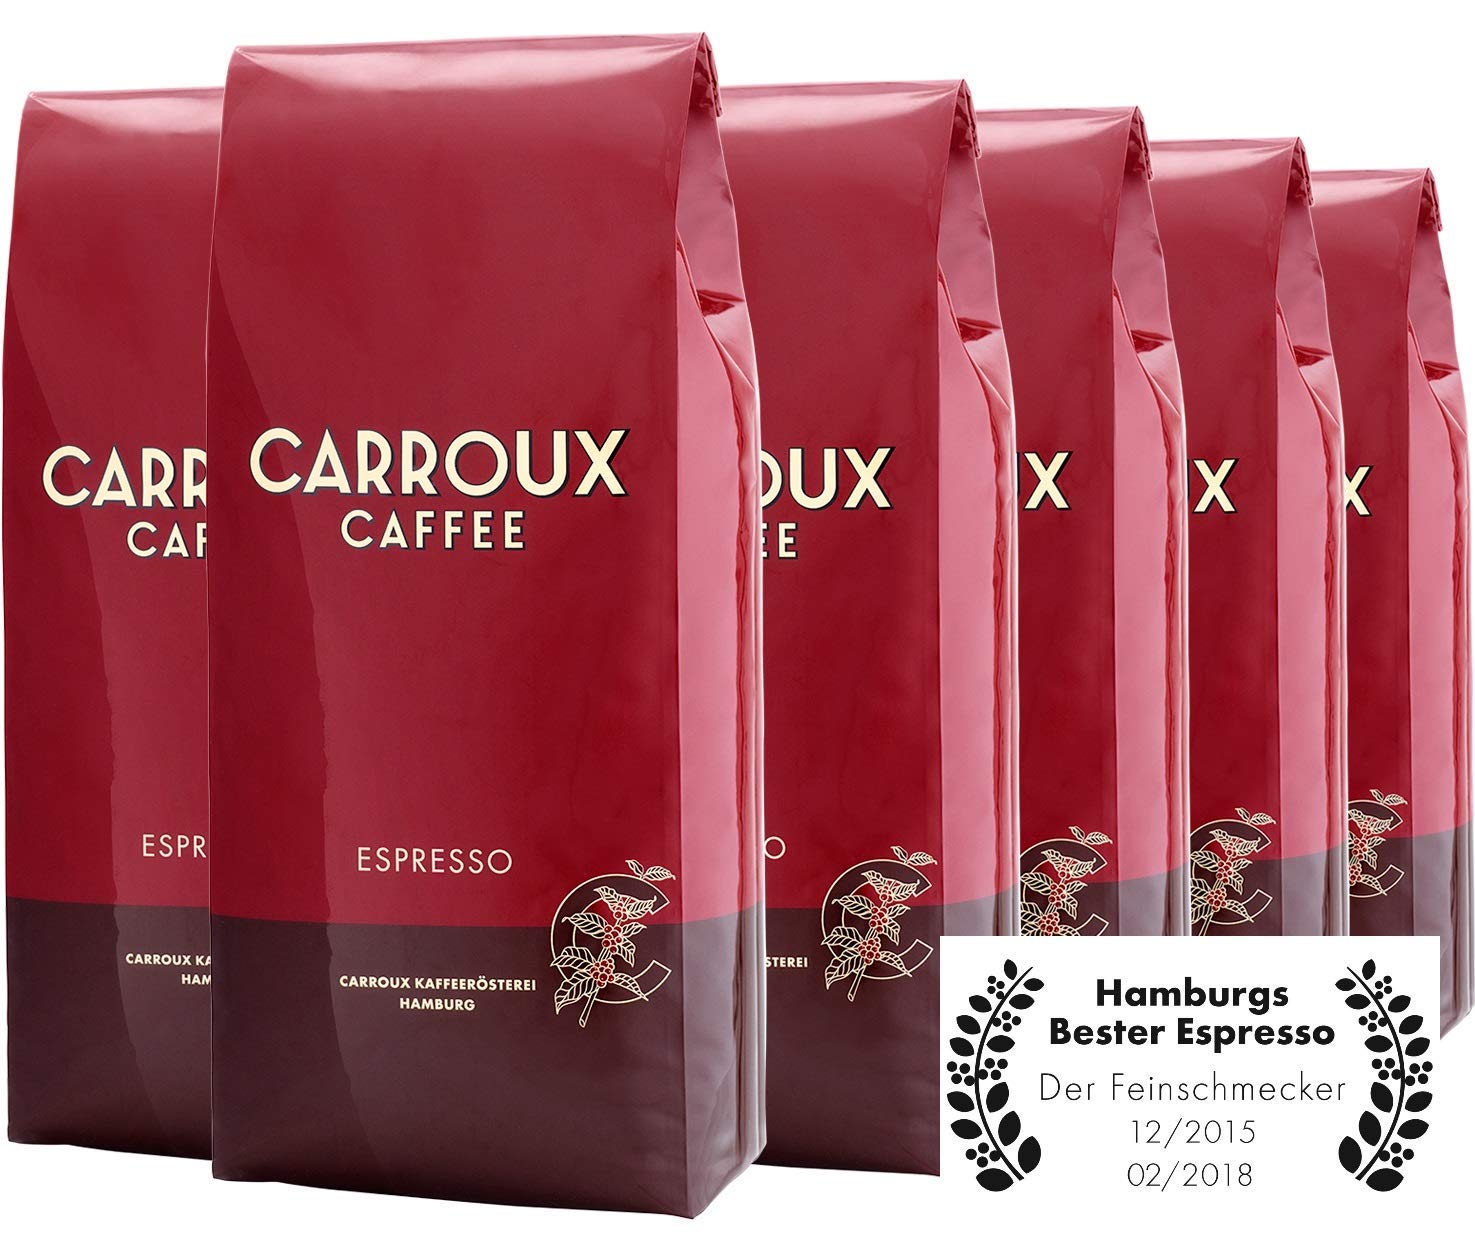 CARROUX Espresso Coffee Beans (6 x 1 kg) - Finest Premium Coffee - For Fully Automatic Coffee Machine and Portafilter Machine - Whole Beans Freshly Roasted